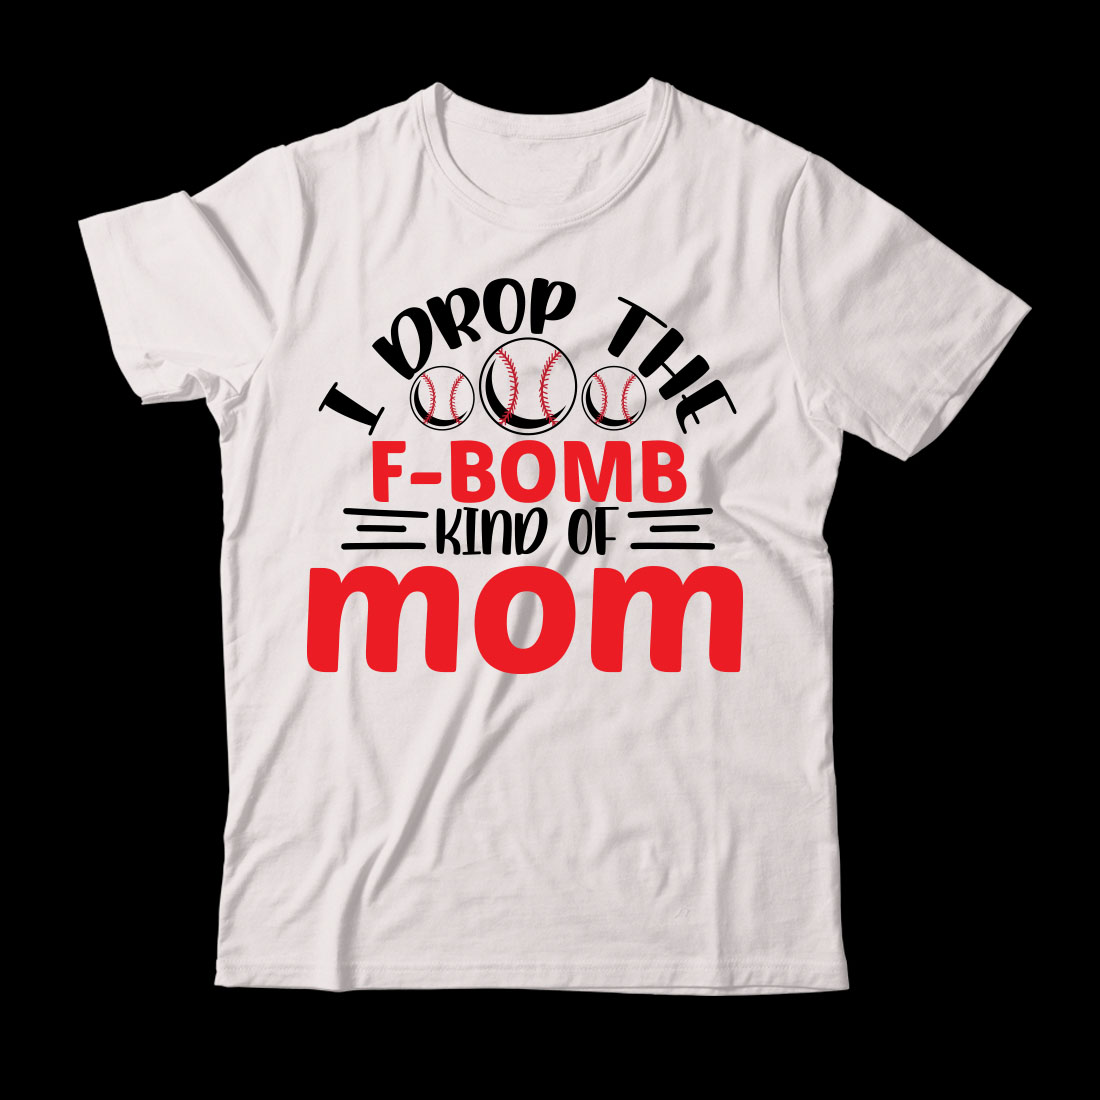 T - shirt that says i drop the f bomb kind of mom.